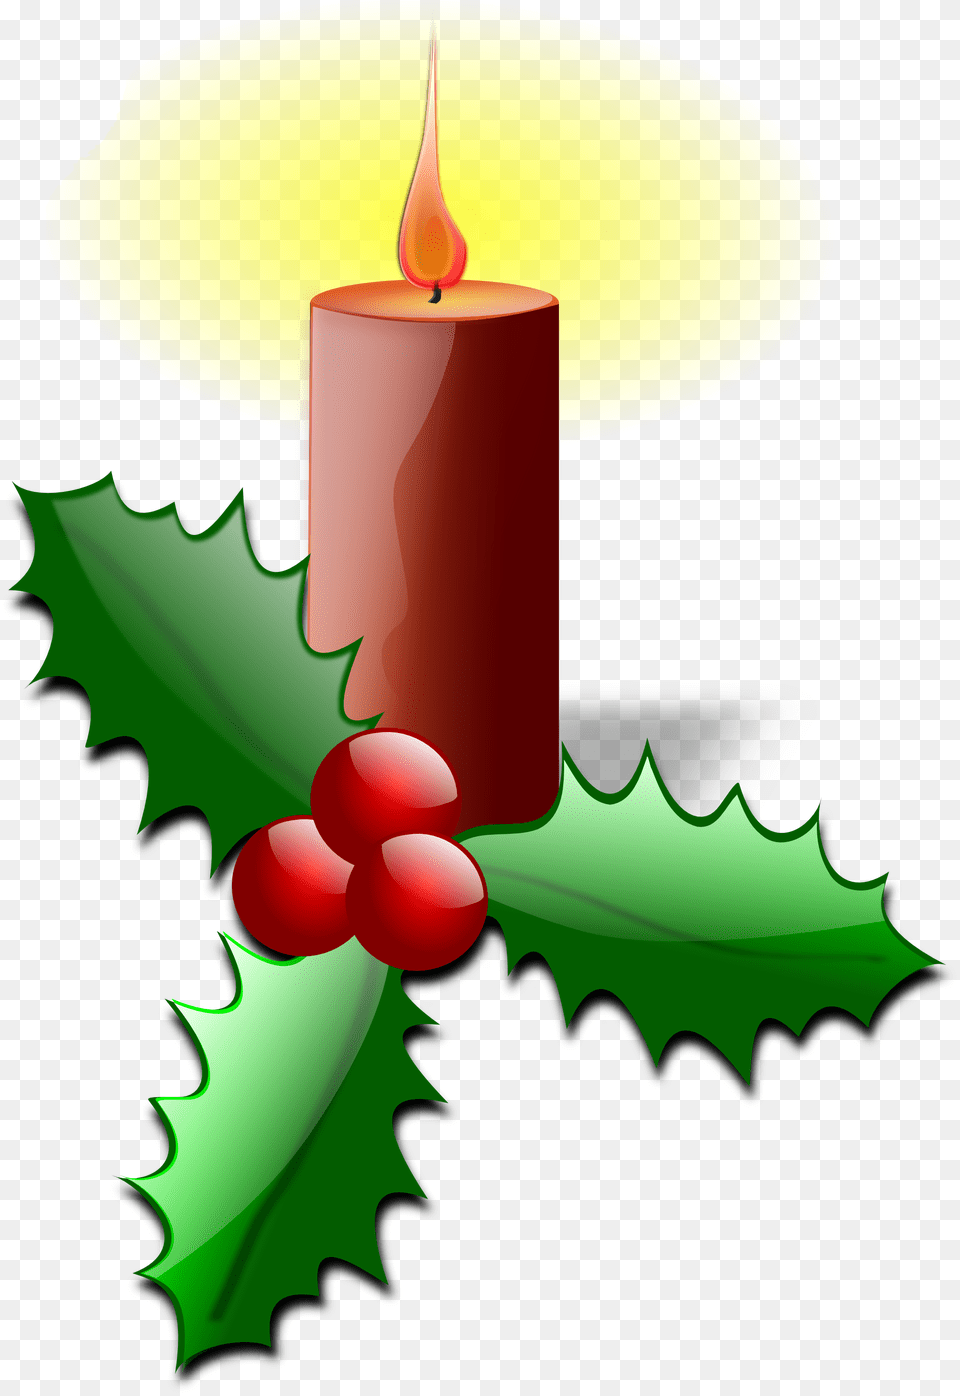 Christmas Clip Art 0010 Images Christmas Designs Clip Art, Candle, Dynamite, Weapon Free Transparent Png